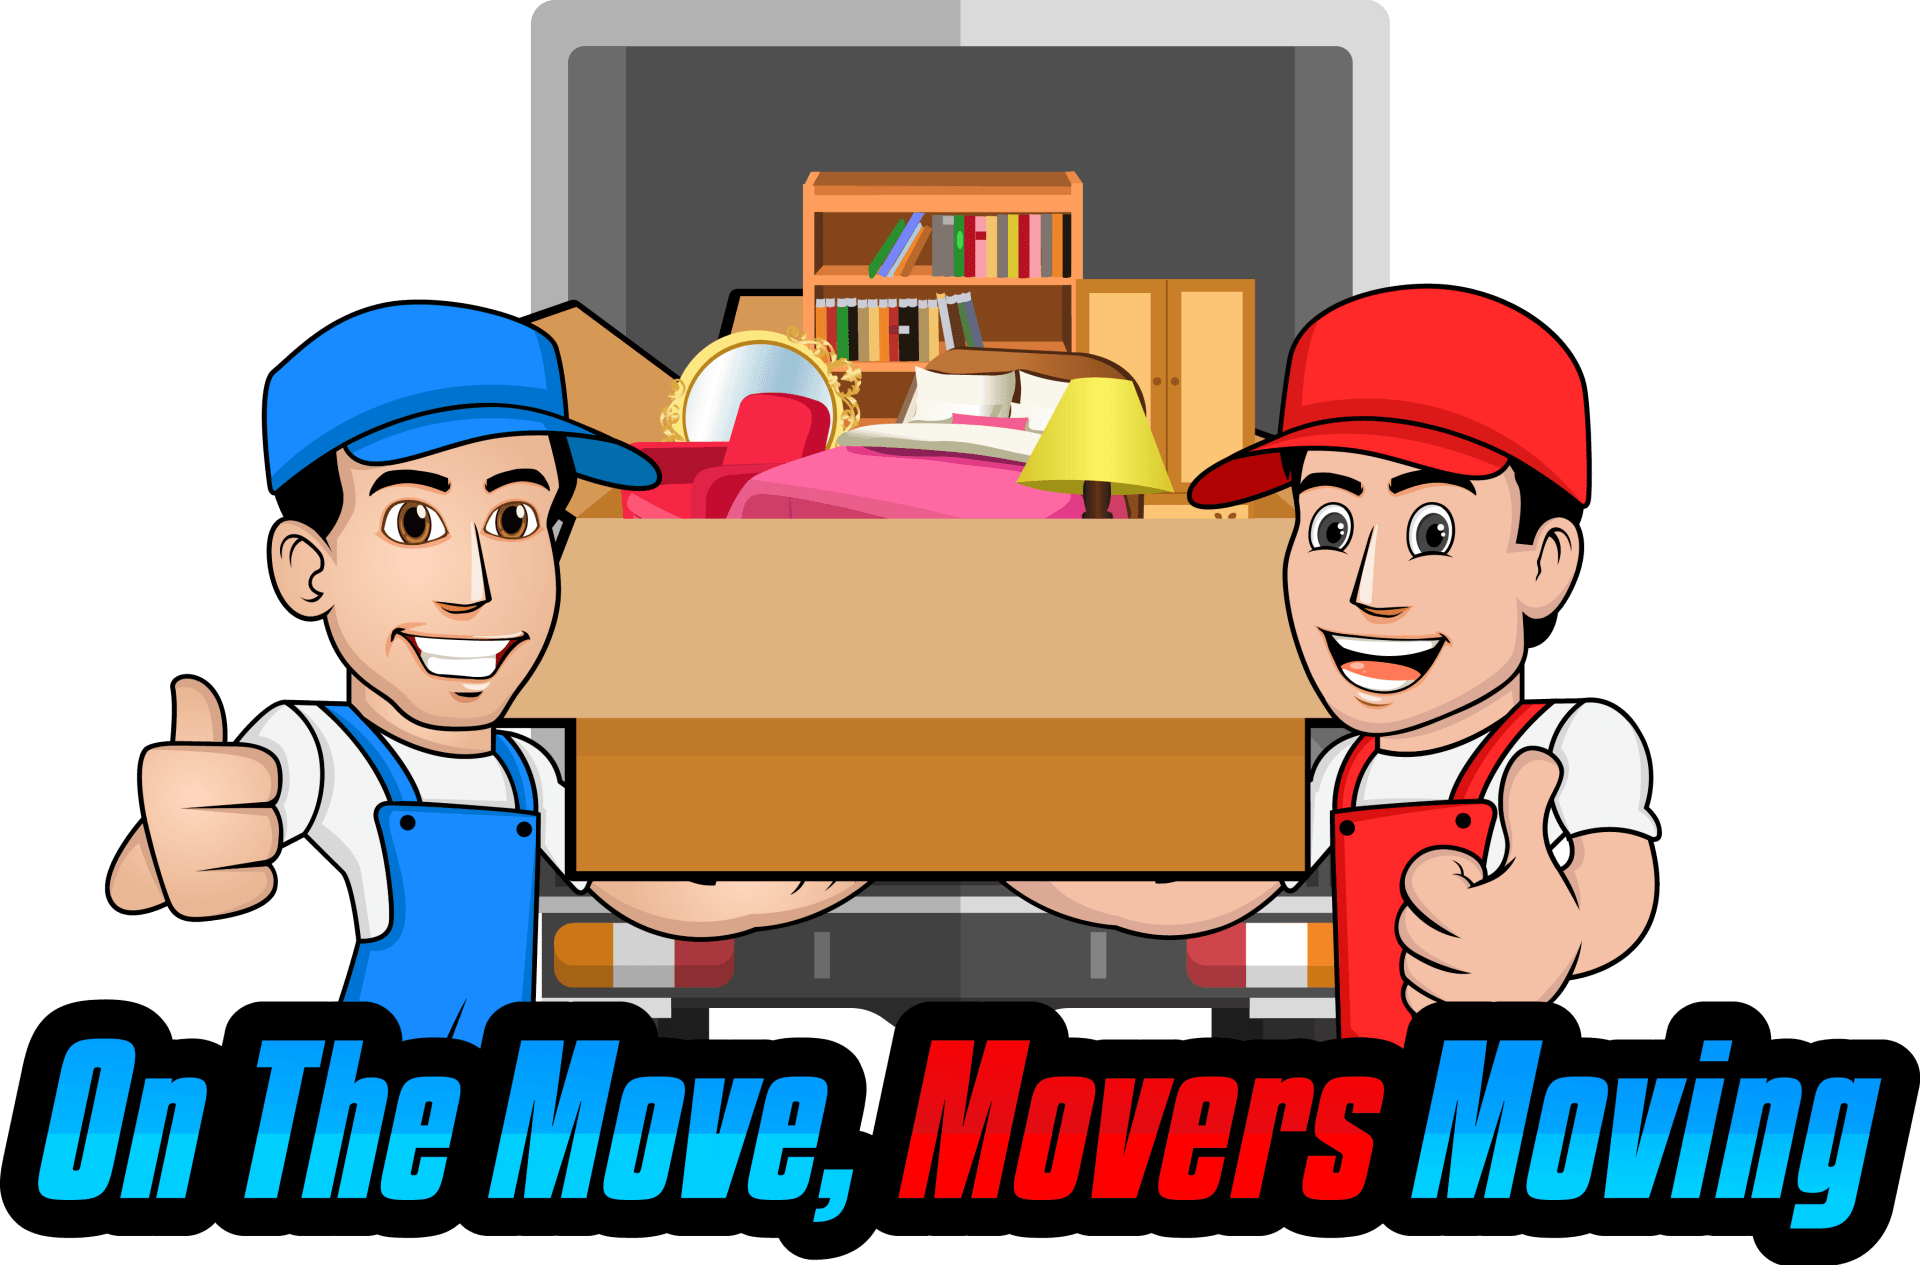 On the Move, Movers Moving